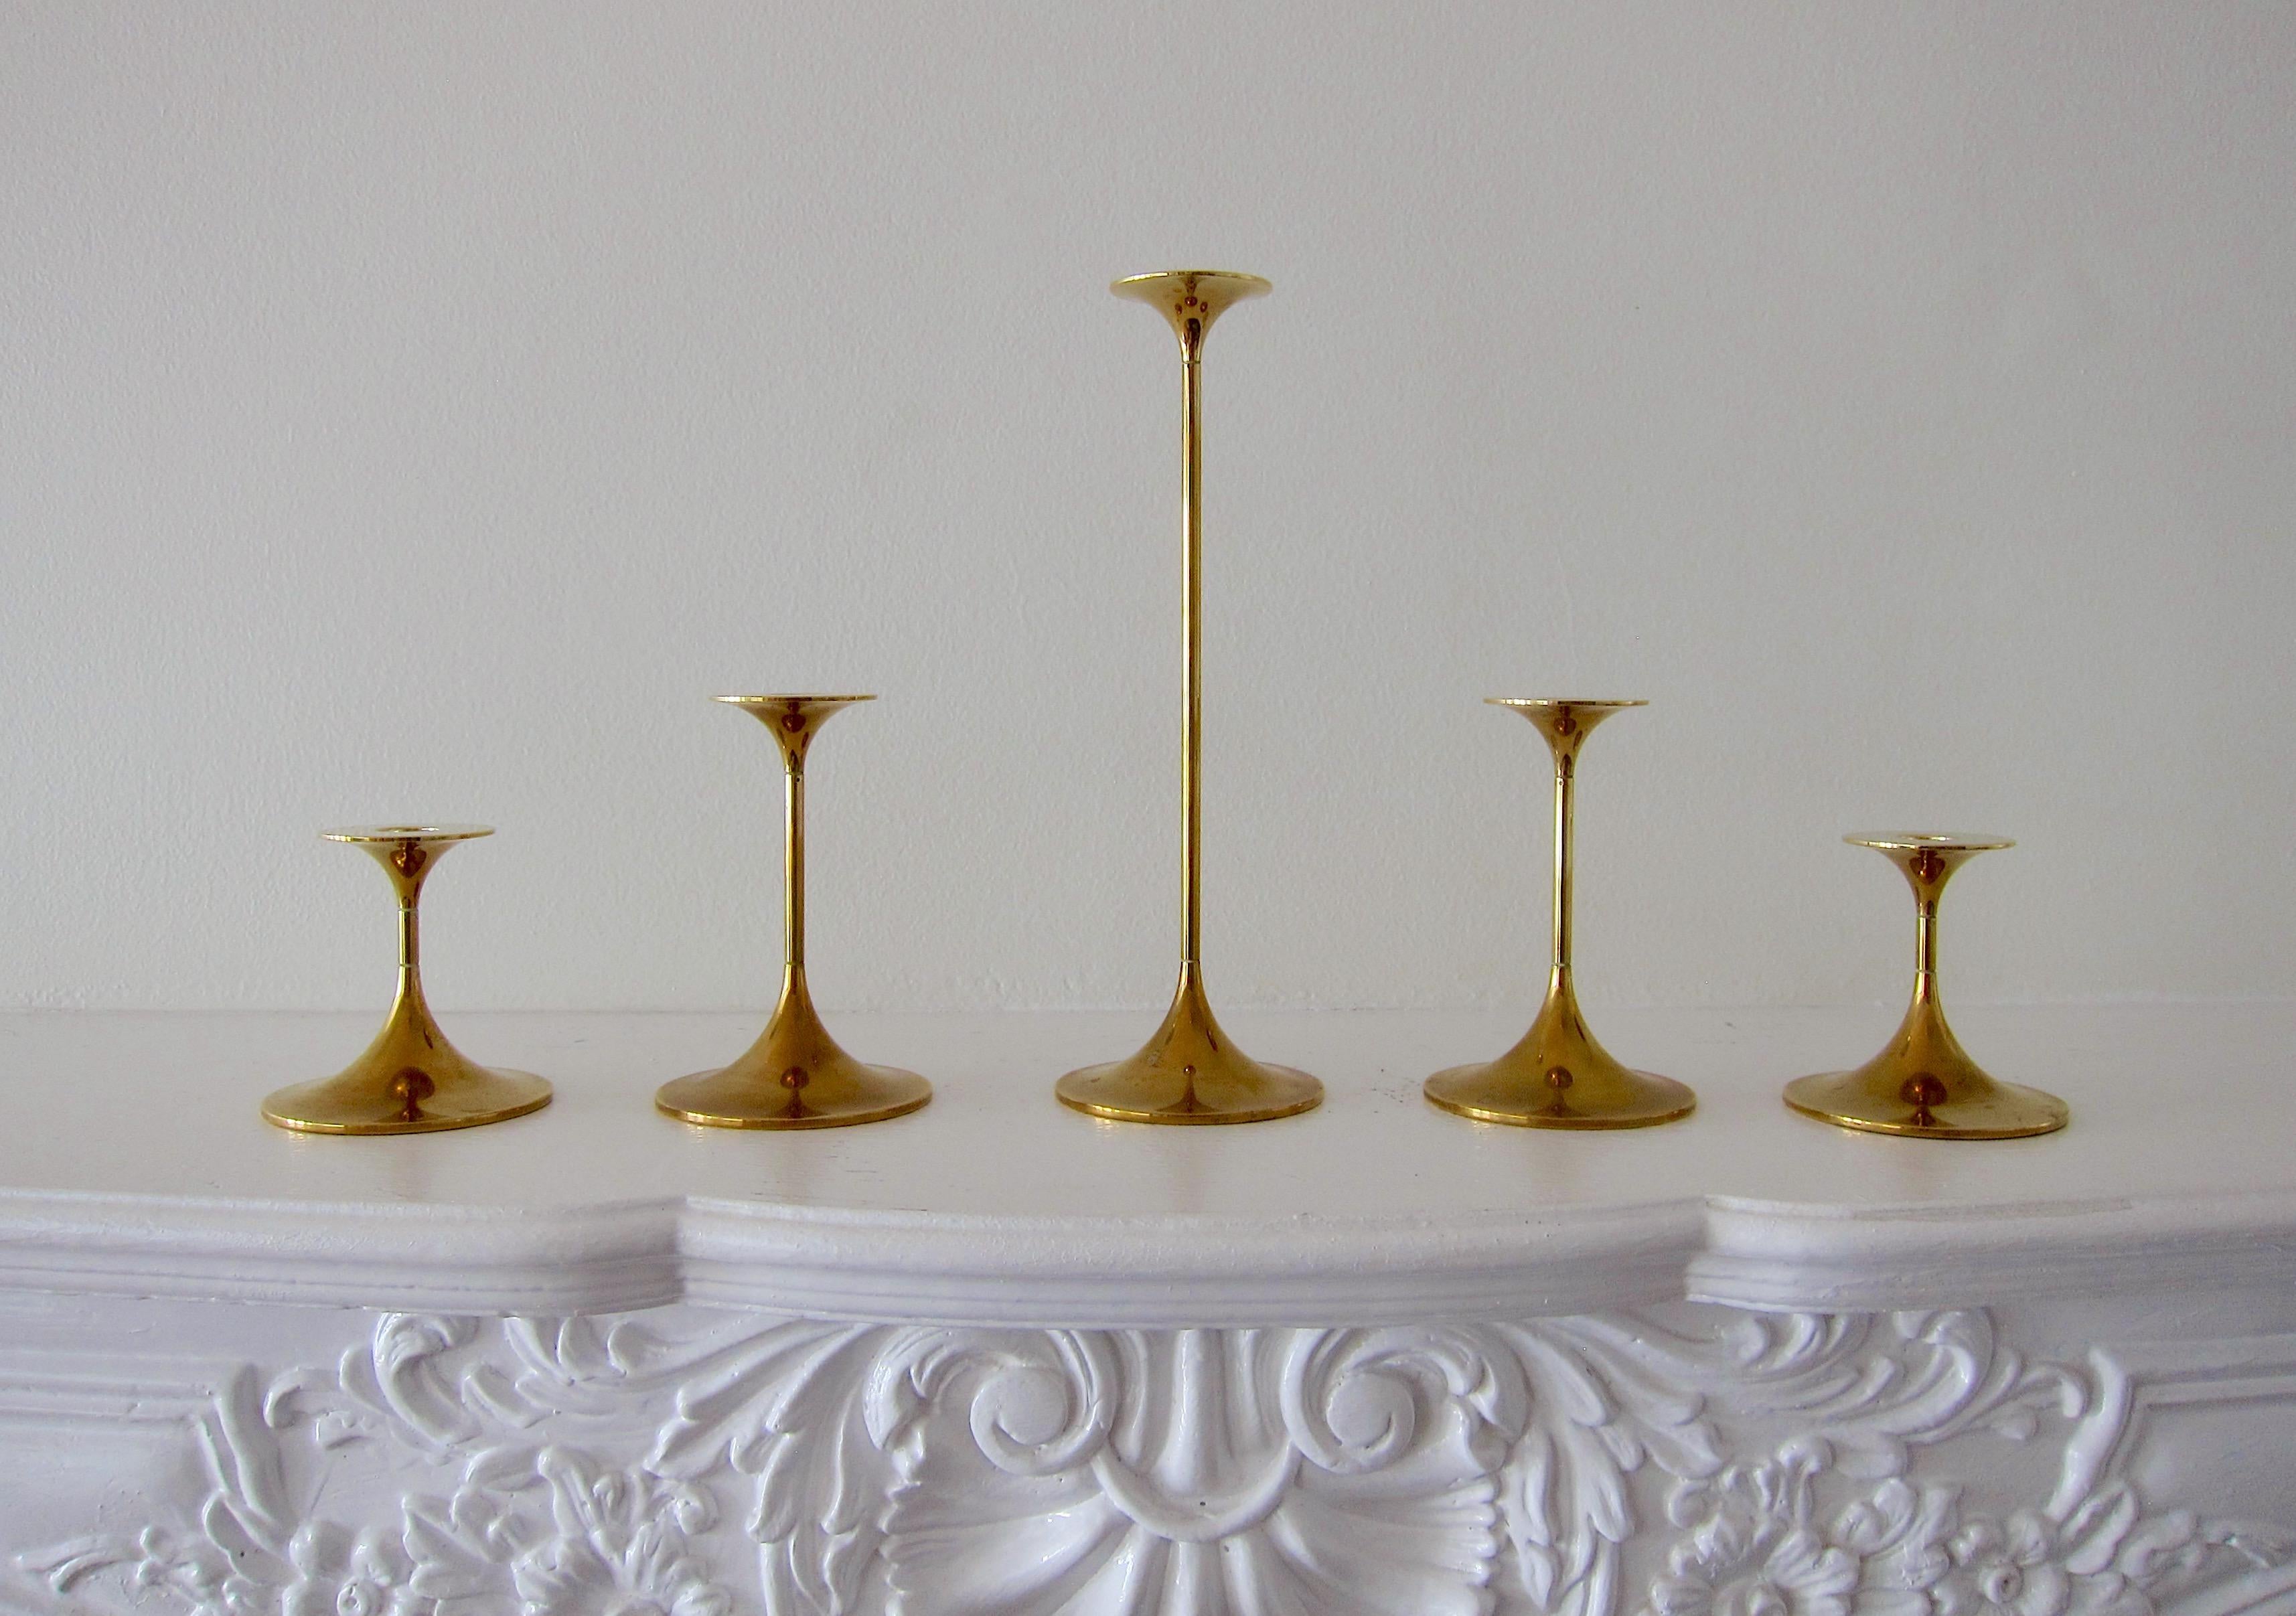 A set of five Scandinavian modern hi-fi candlesticks in solid golden brass designed by architect Max Brüel (1927-1995) for Torben Ørskov of Copenhagen, Denmark in 1960. These sleek, minimalist candle holders of graduating size are in very good